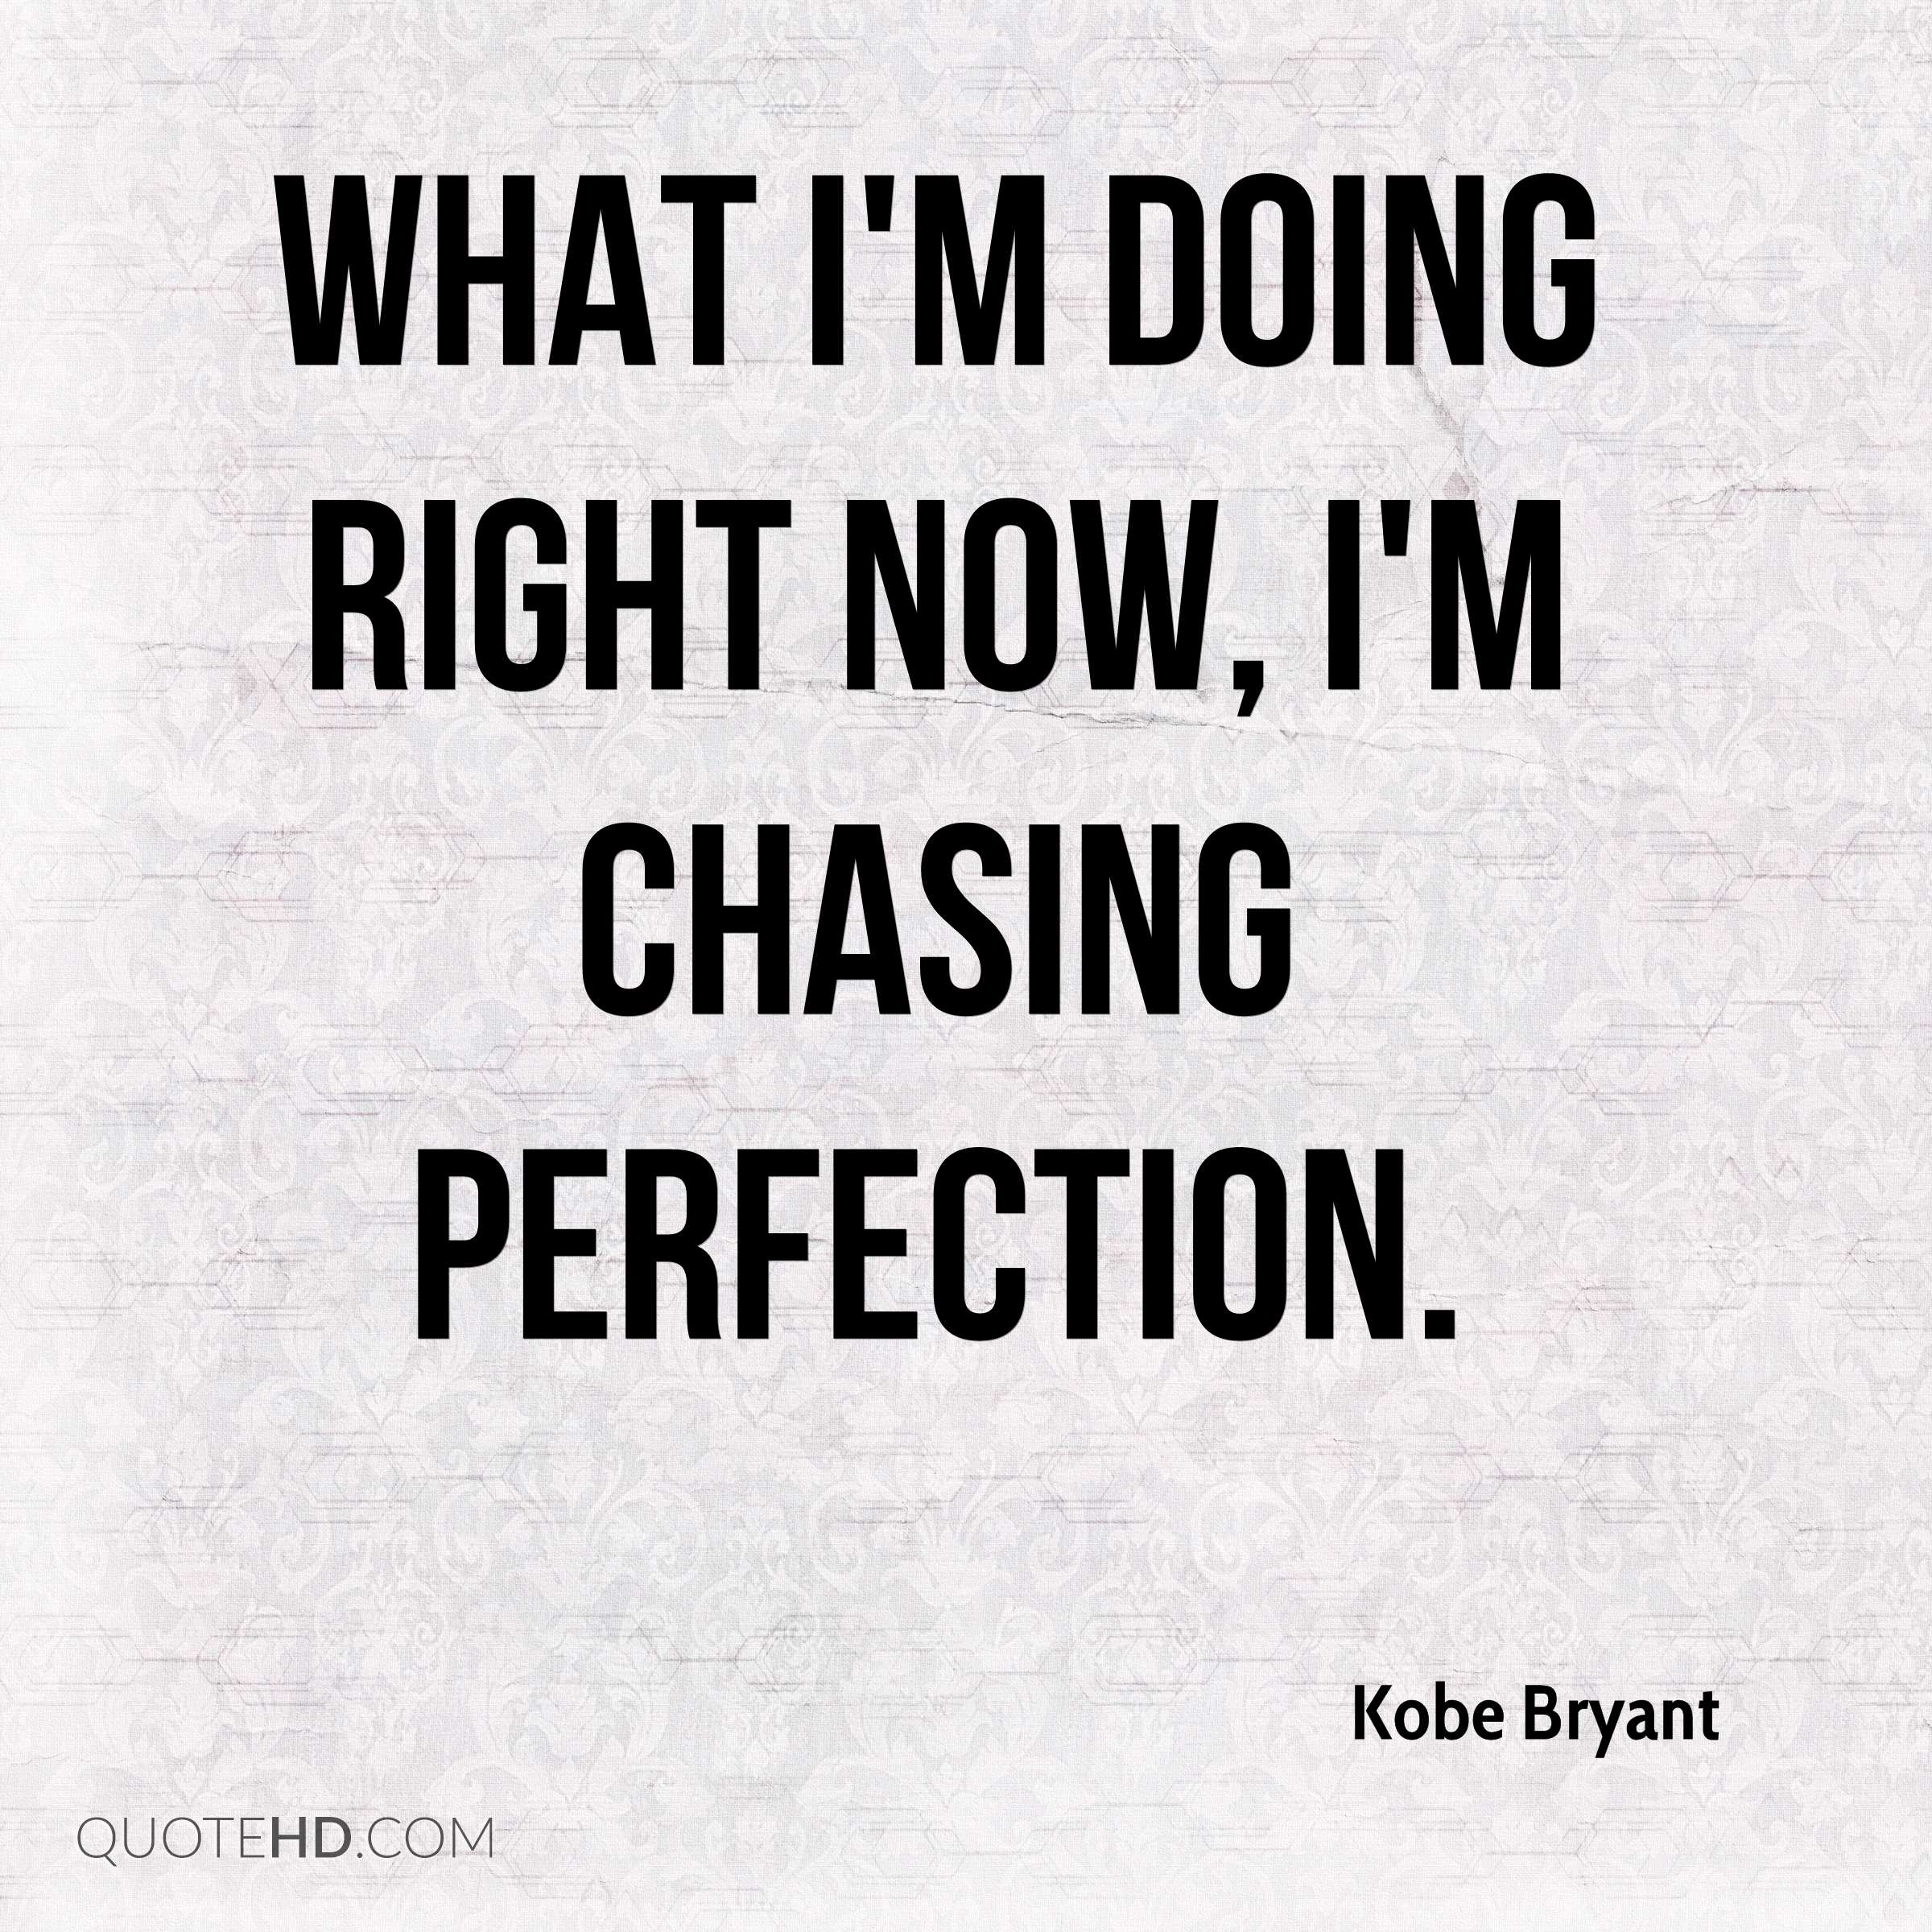 What I’m doing right now, I’m chasing perfection. Kobe Bryant